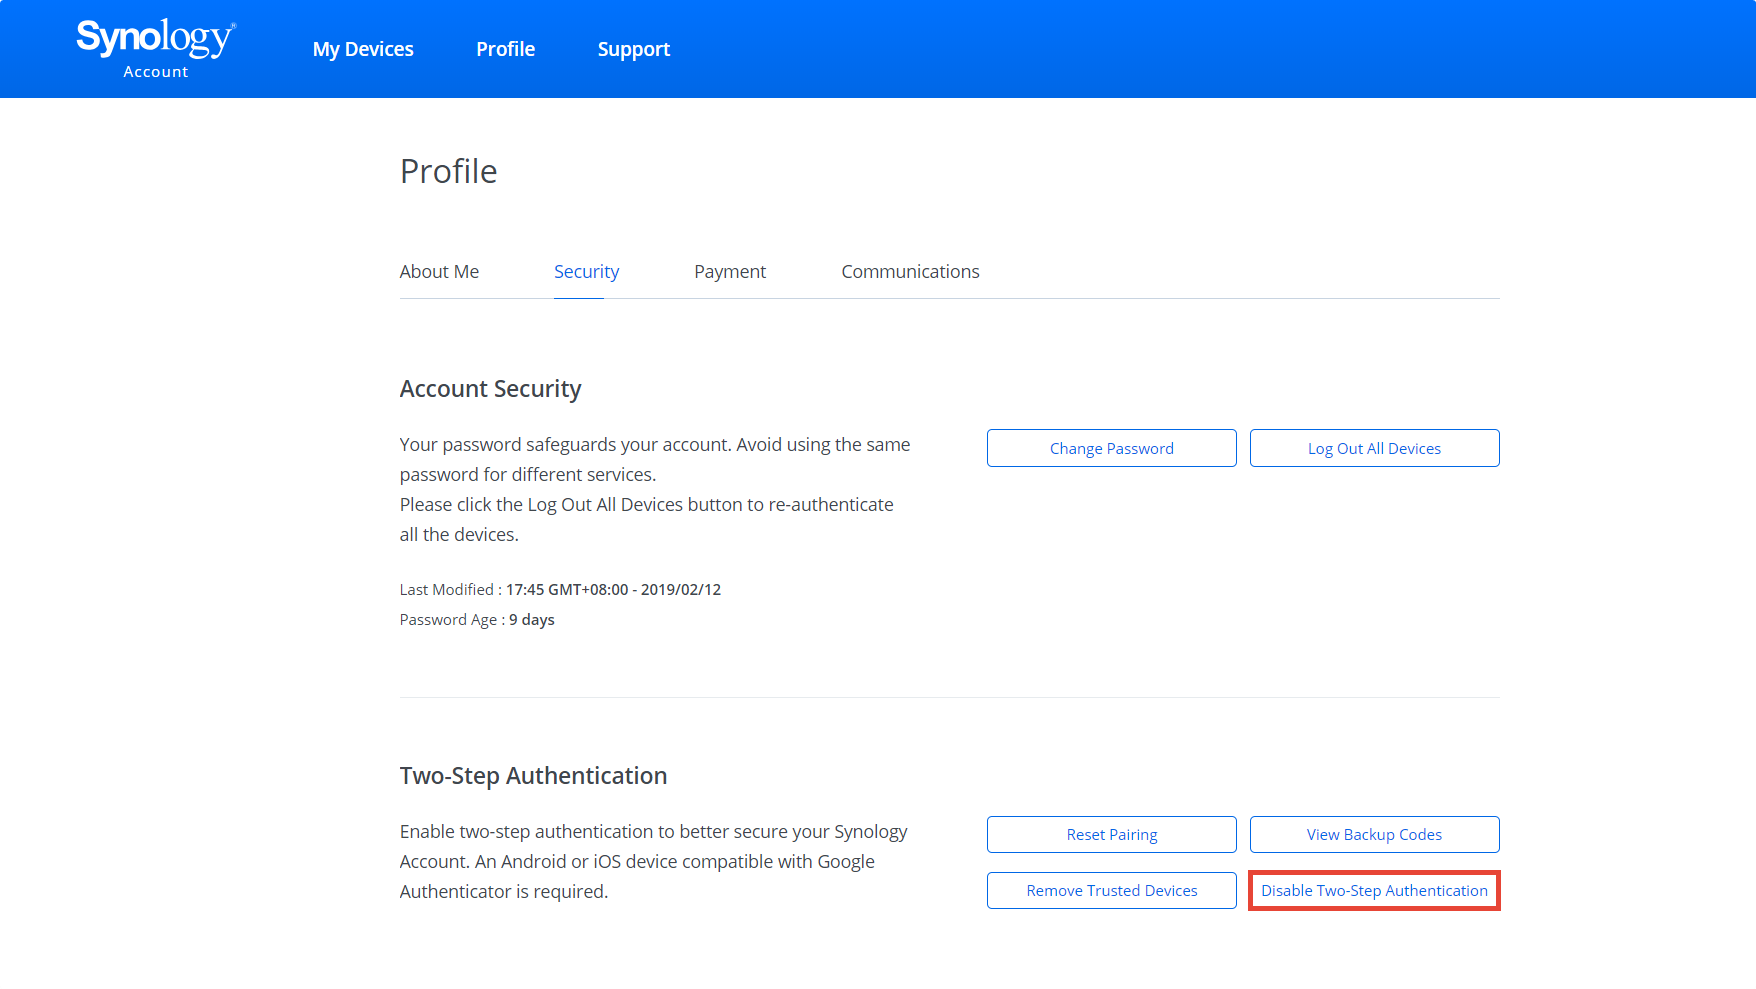 Windows security blocking synology login requesting pins